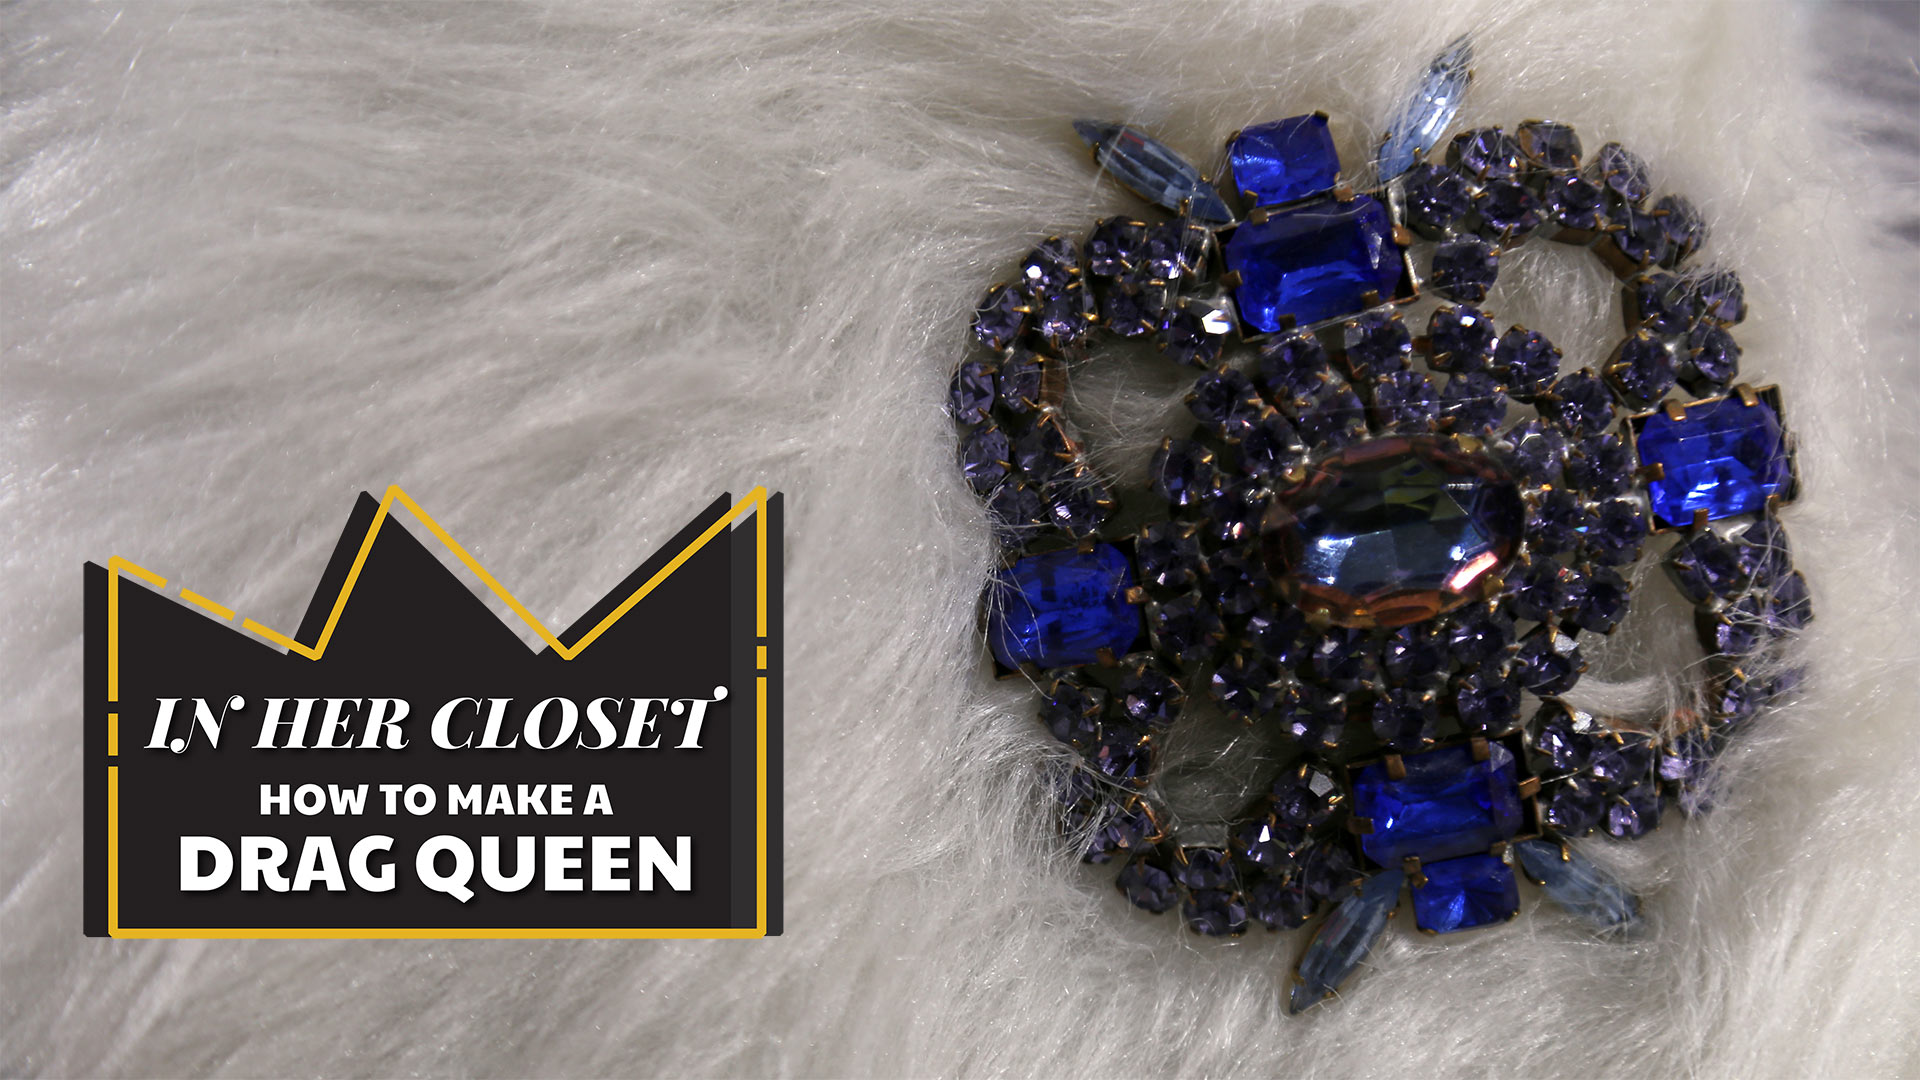 in her closet how to make a drag queen logo superimposed on white fur with blue gemstone brooch